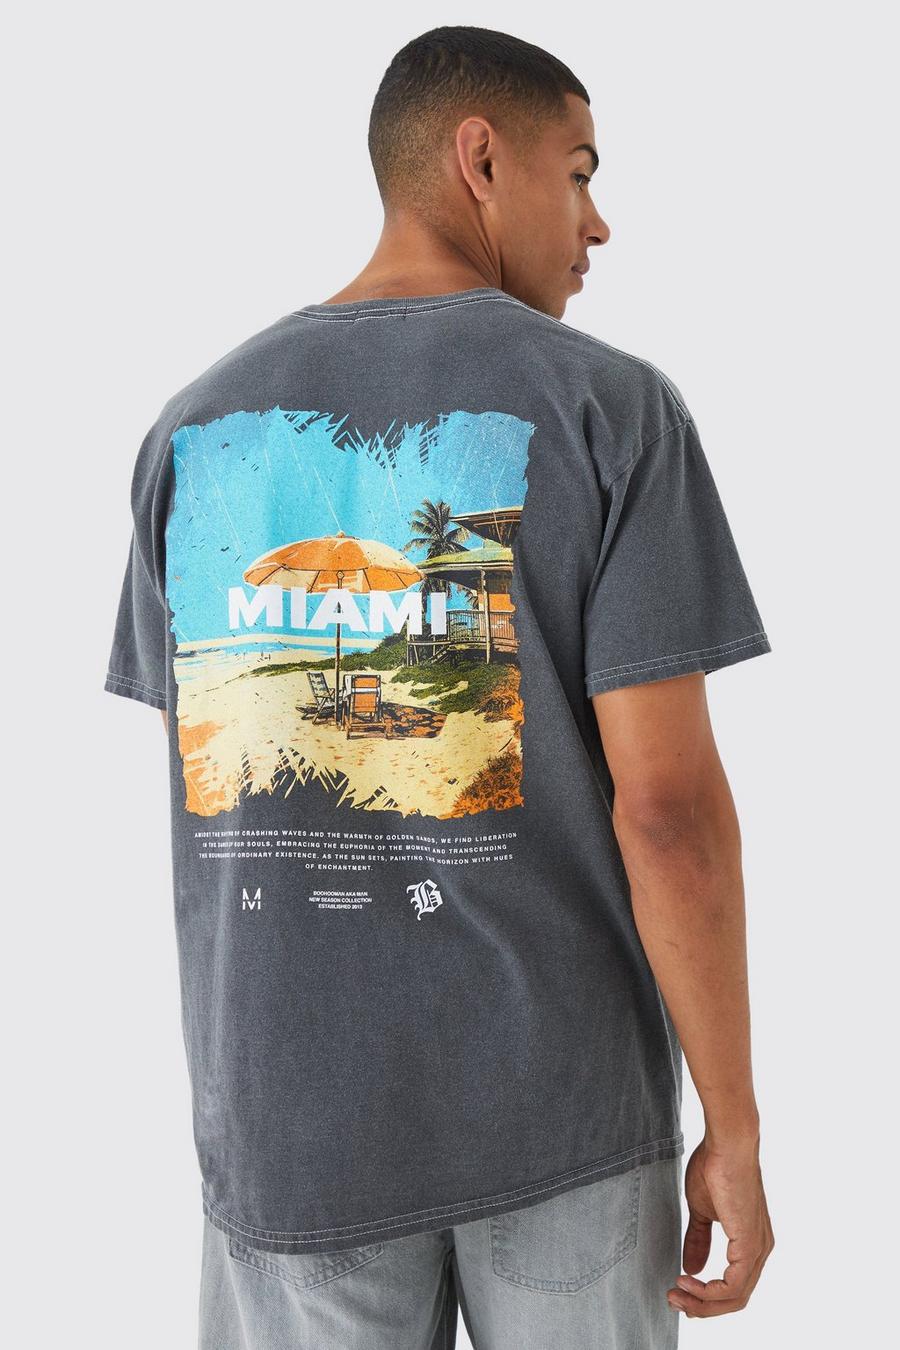 Charcoal gris Oversized Overdyed Miami Beach T-shirt